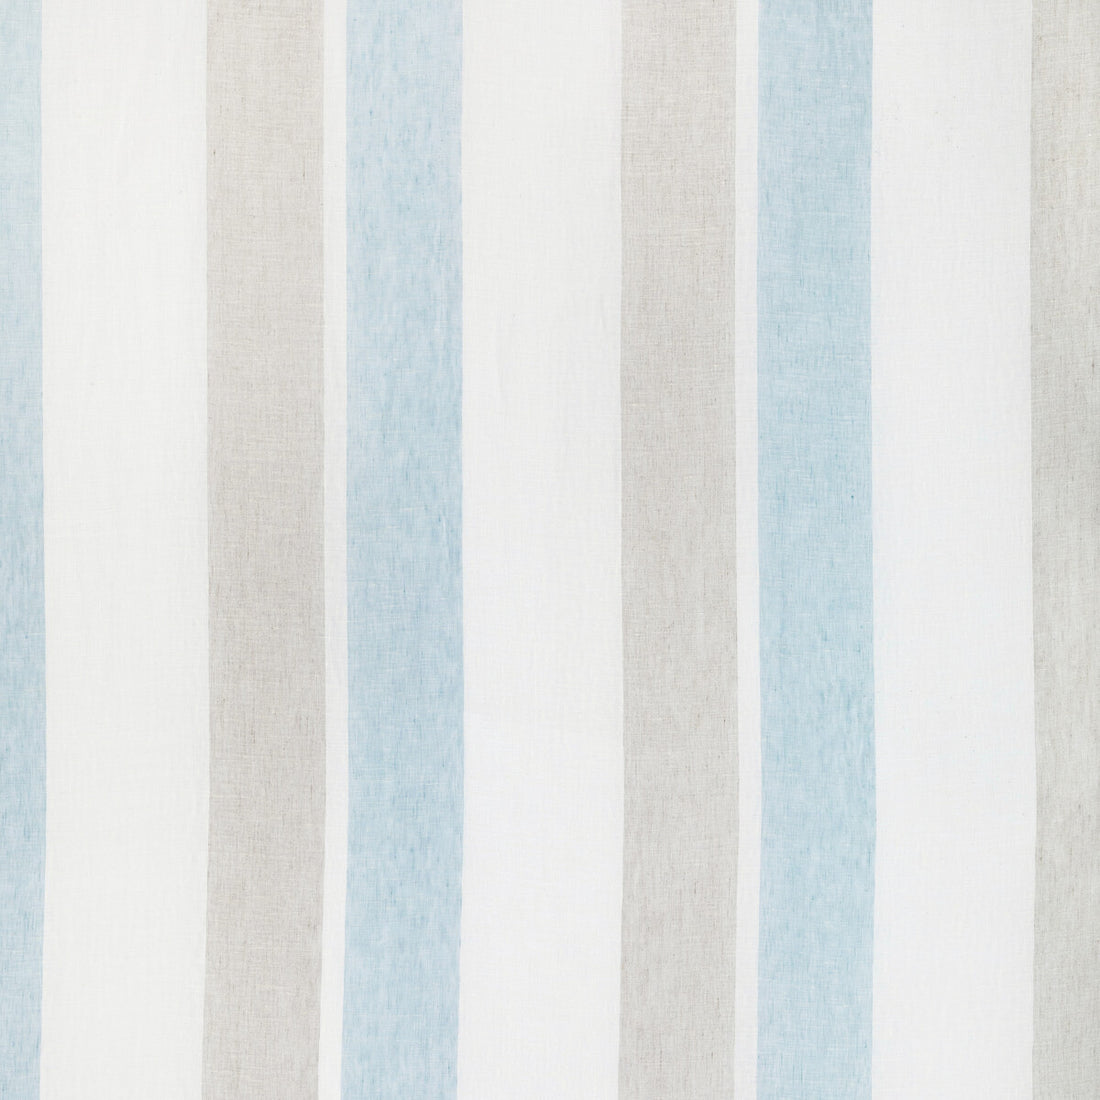 Del Mar Sheer fabric in sky/natural color - pattern 2021119.1516.0 - by Lee Jofa in the Summerland collection